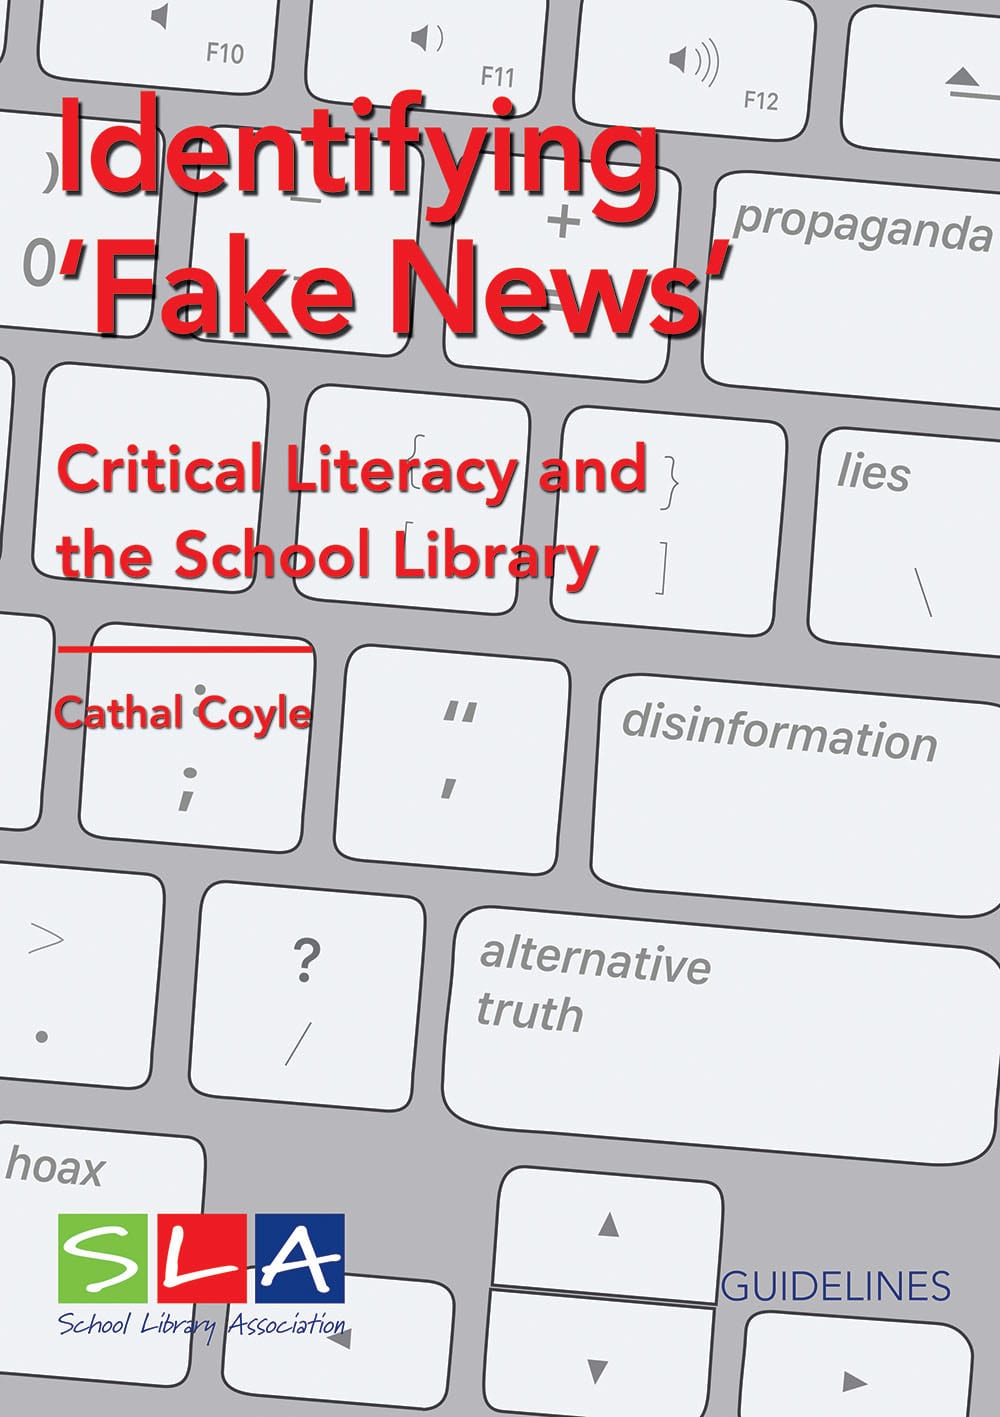 SLA Guidelines | Identifying Fake News: Critical Literacy and the School Library Newsroom